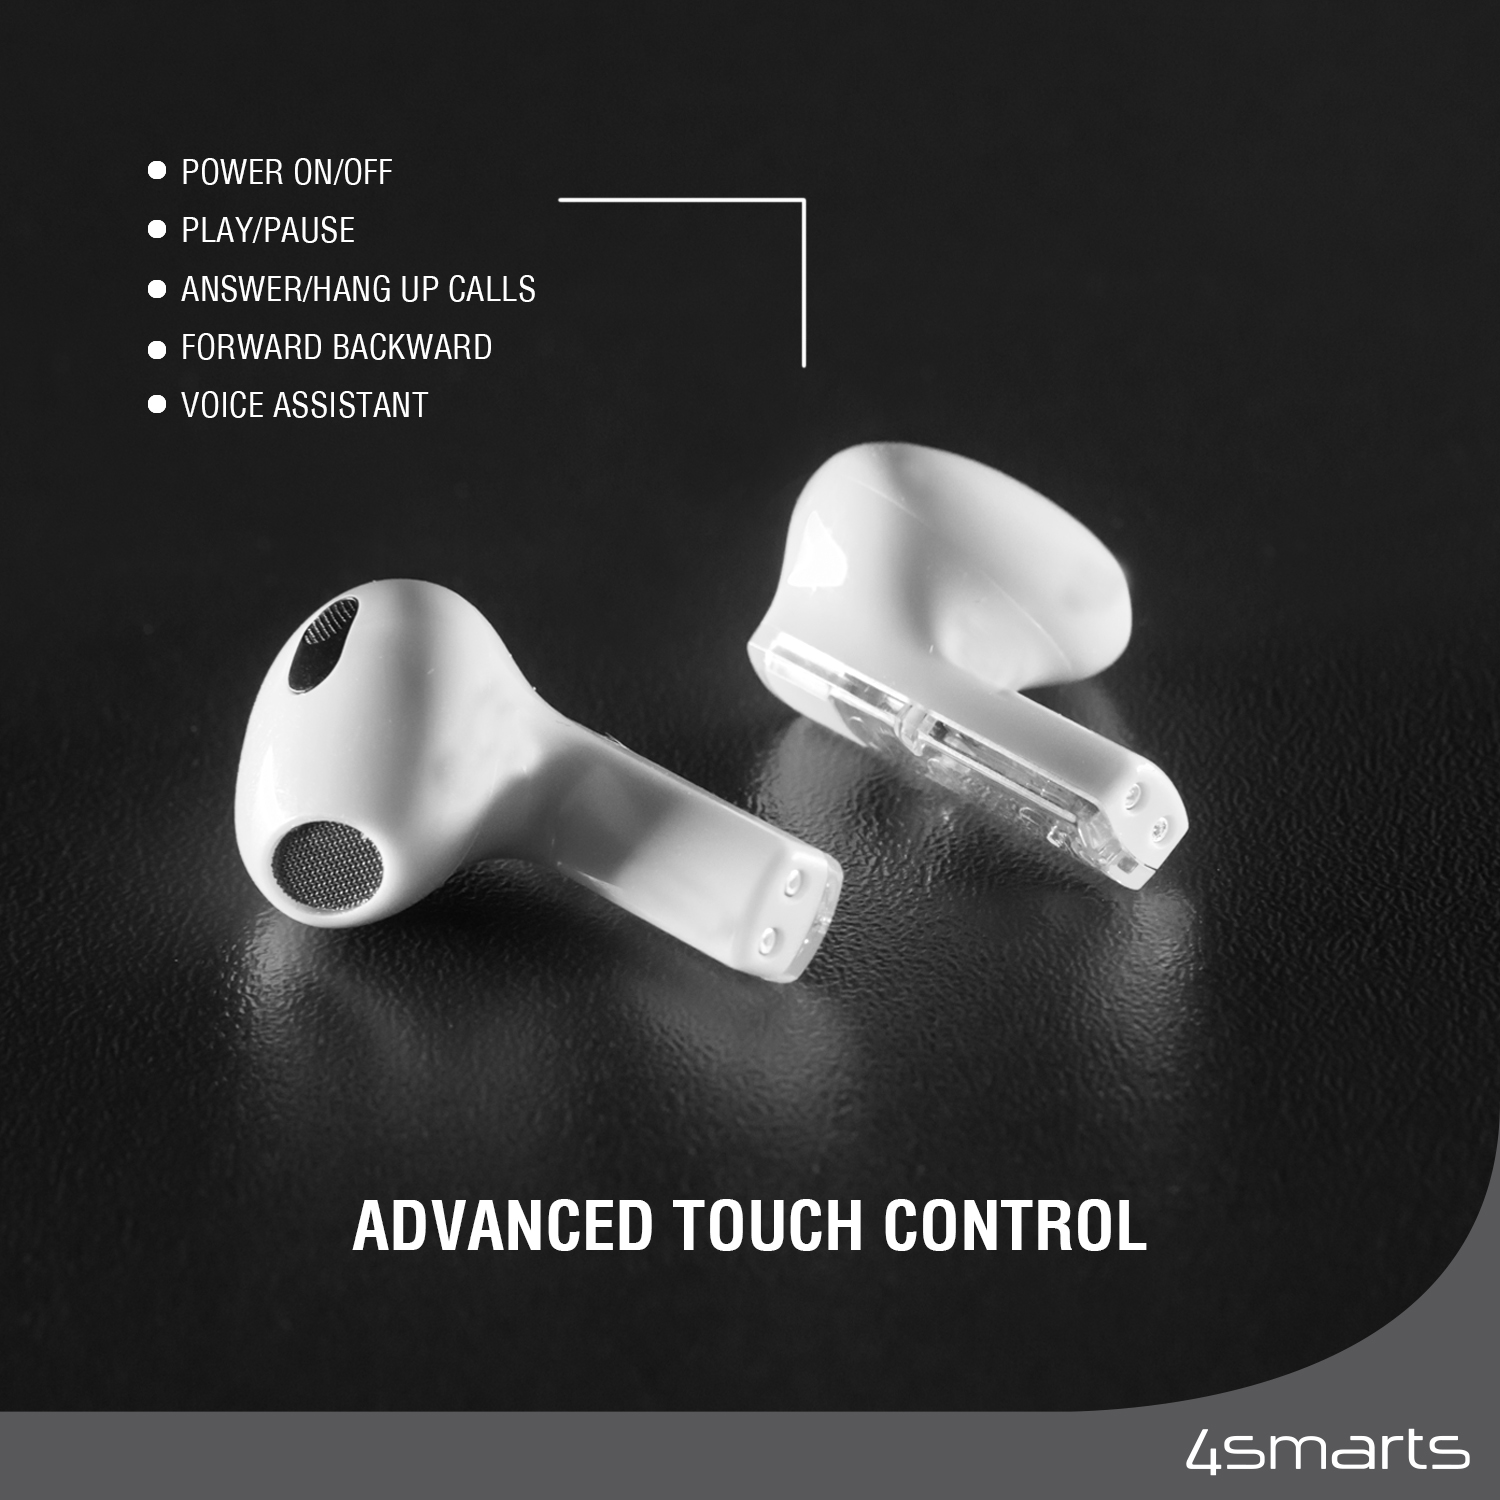 We designed these earphones including the intuitive touch and voice control.